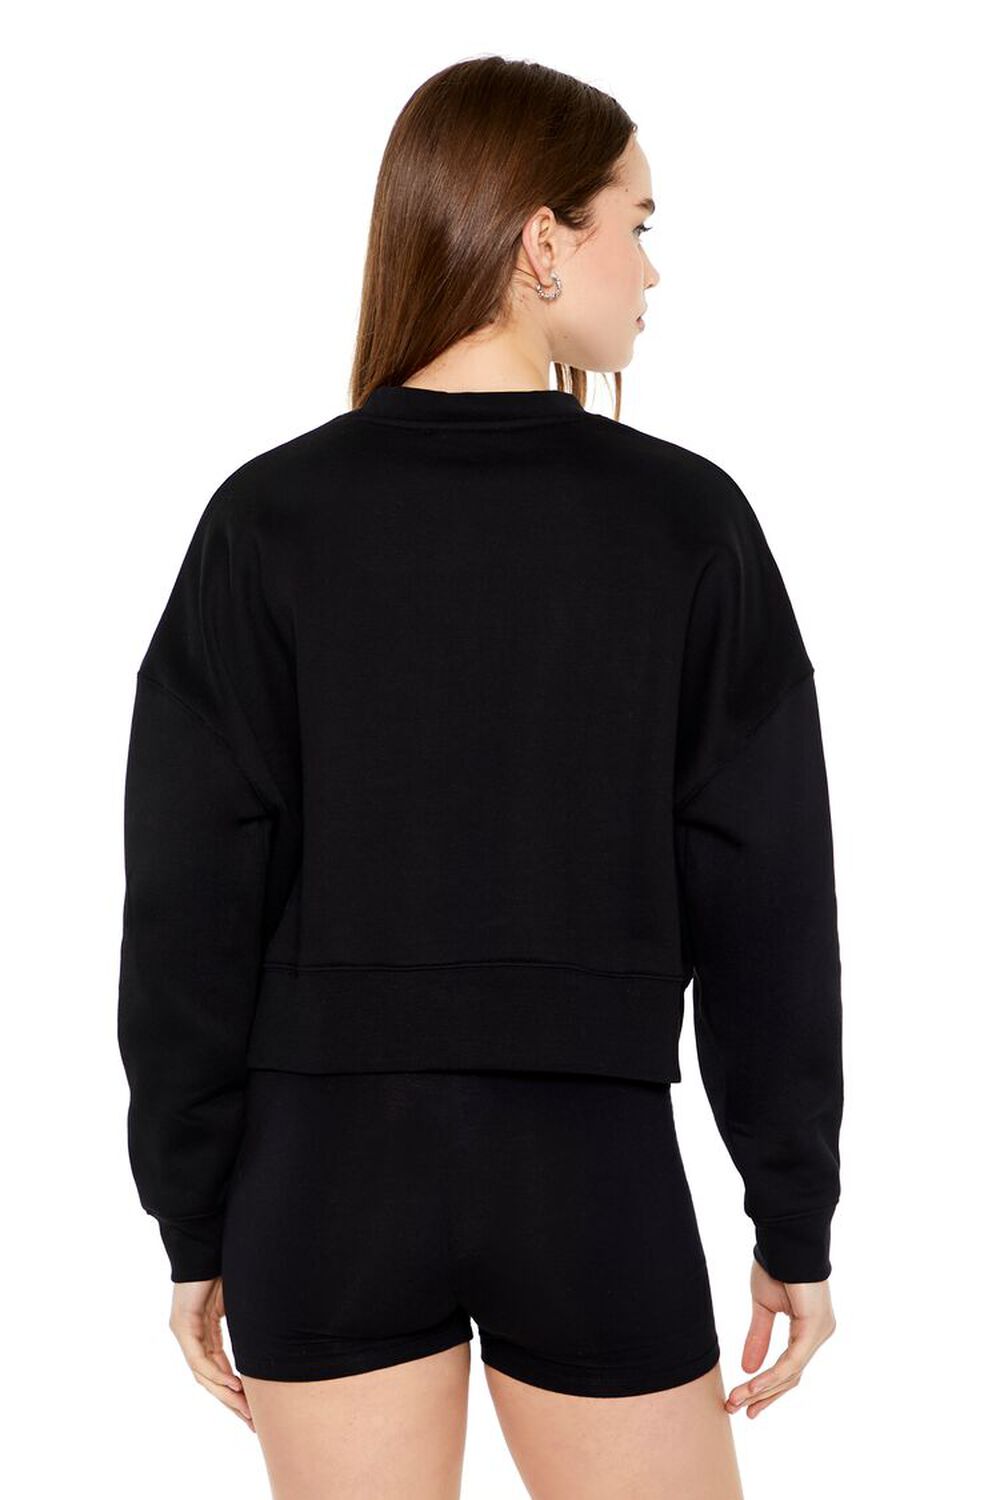 BLACK Montreal Leisure Club Embroidered Pullover, image 3